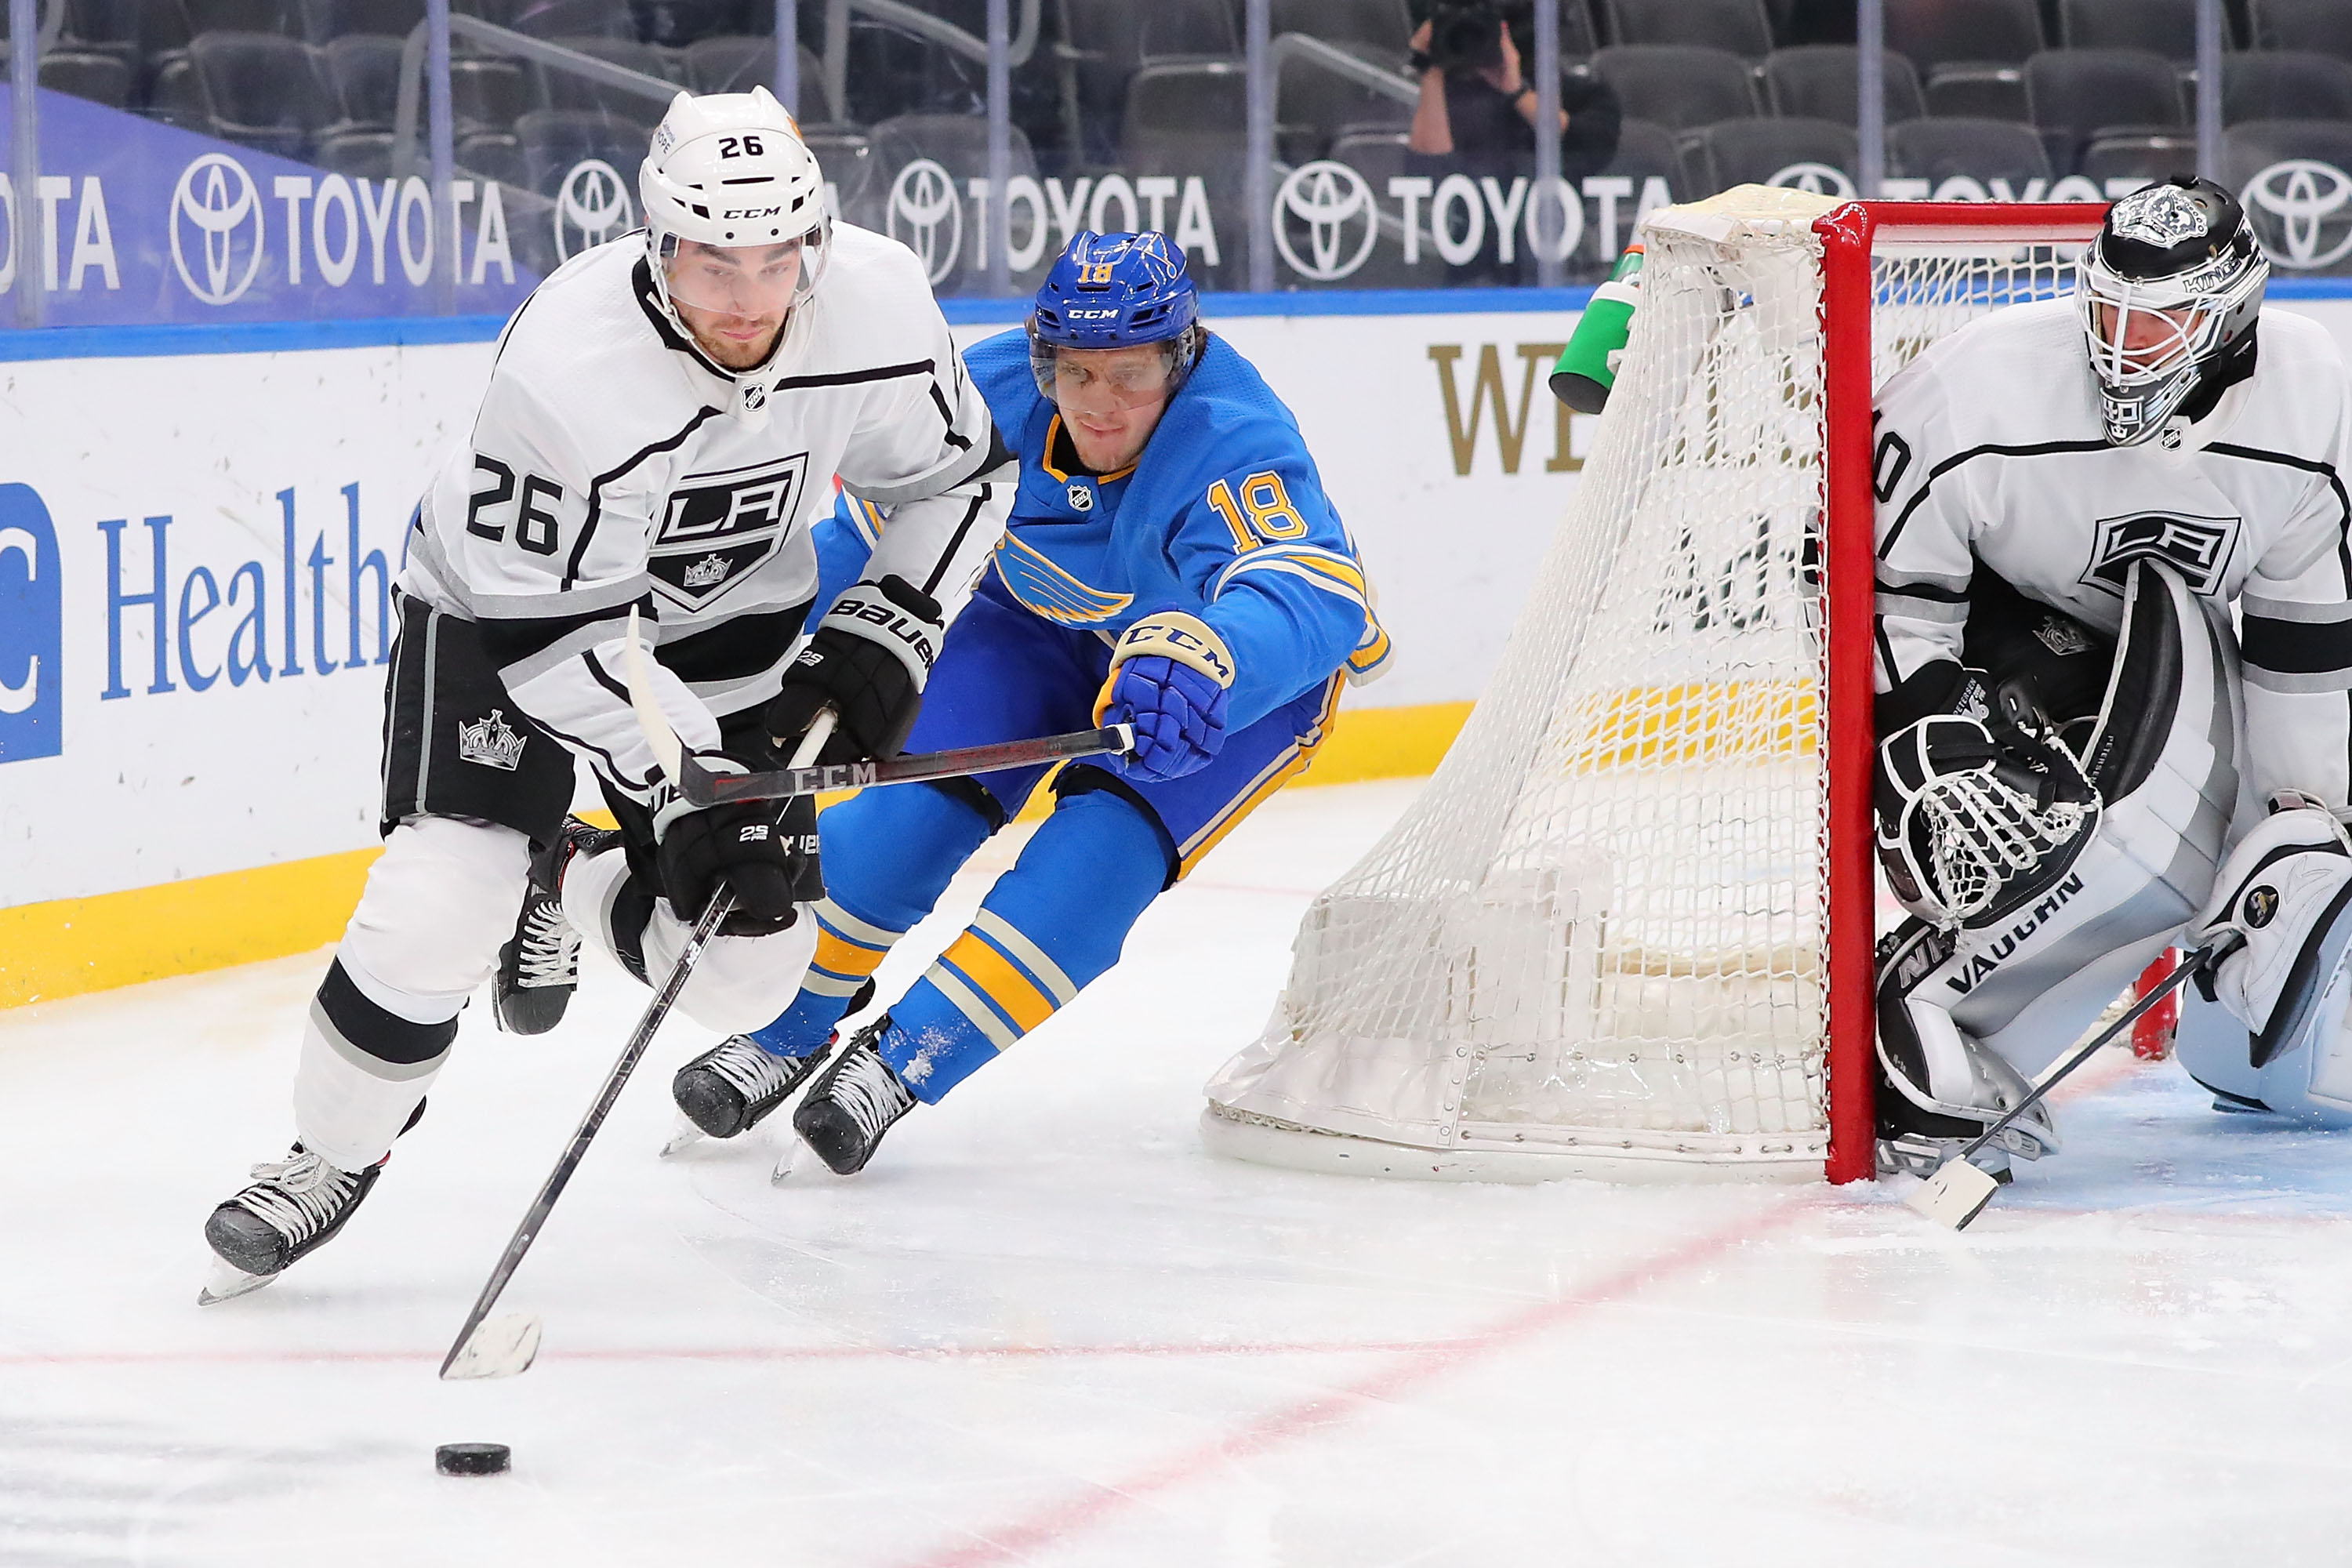 Sean Walker #26 of the Los Angeles Kings controls the puck against Robert Thomas #18 of the St. Louis Blues in the third period at Enterprise Center on January 23, 2021 in St Louis, Missouri.